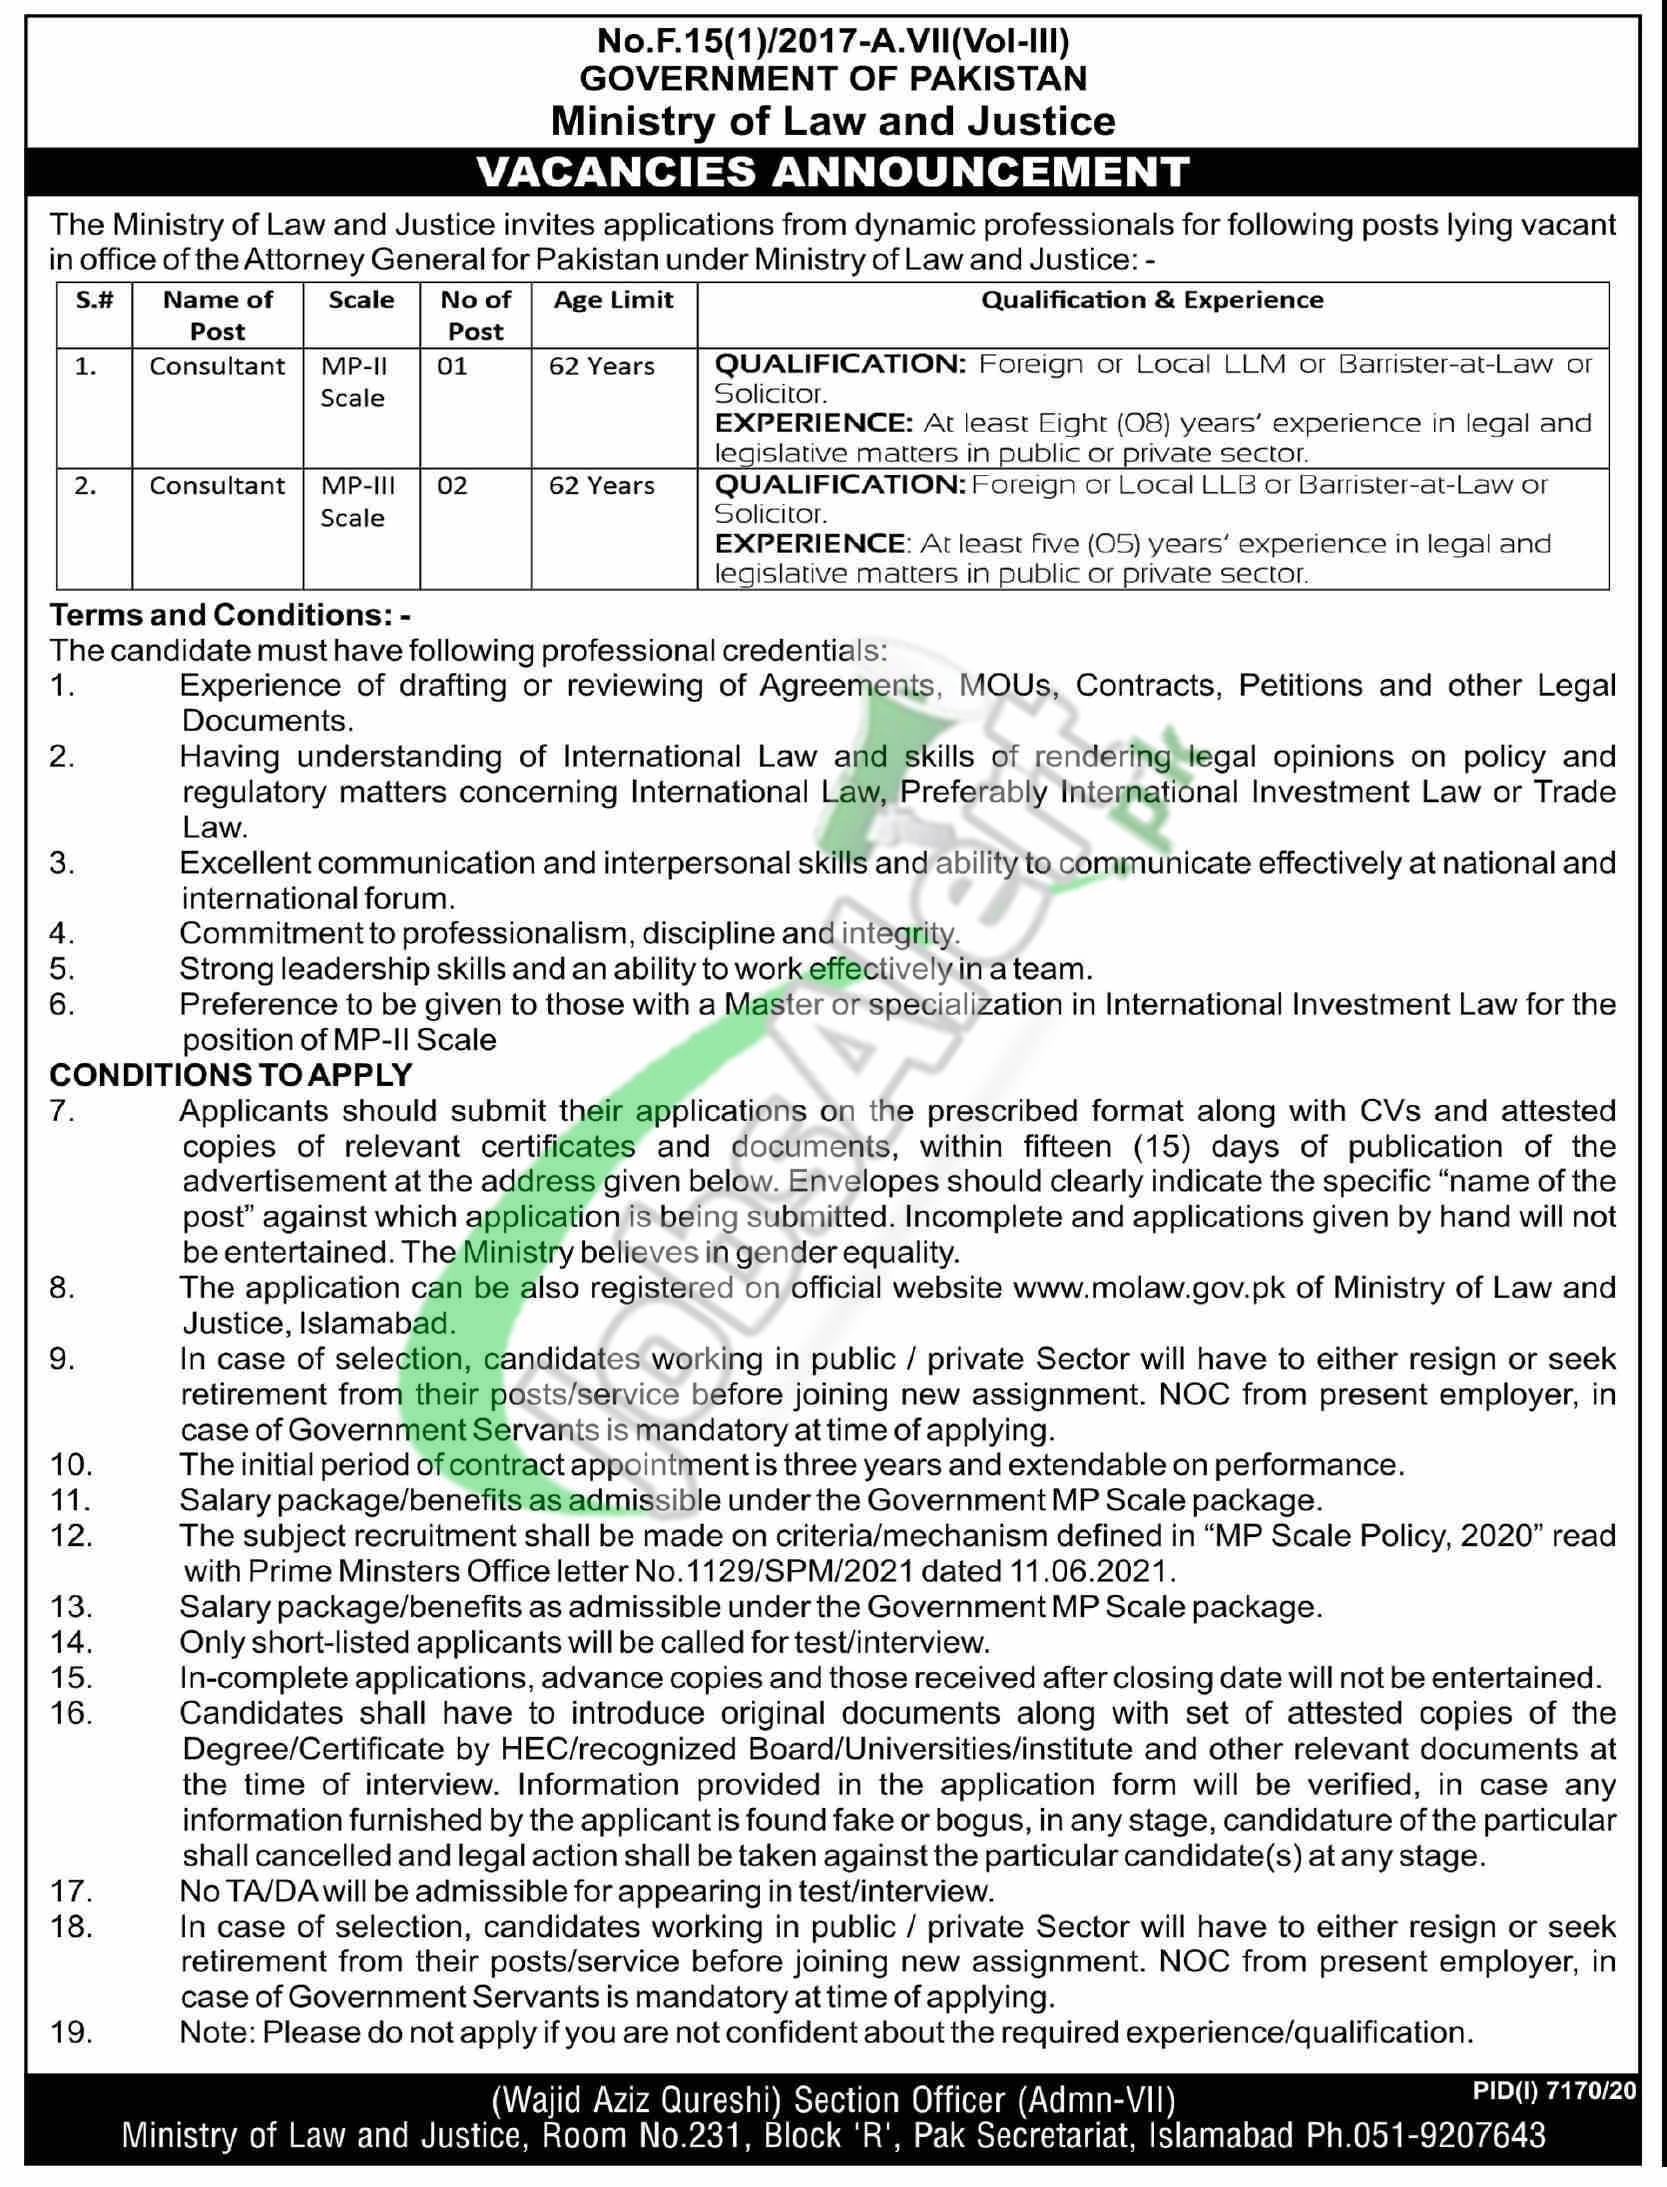 Ministry of Law & Justice Pakistan Jobs 2021 Application Form Download